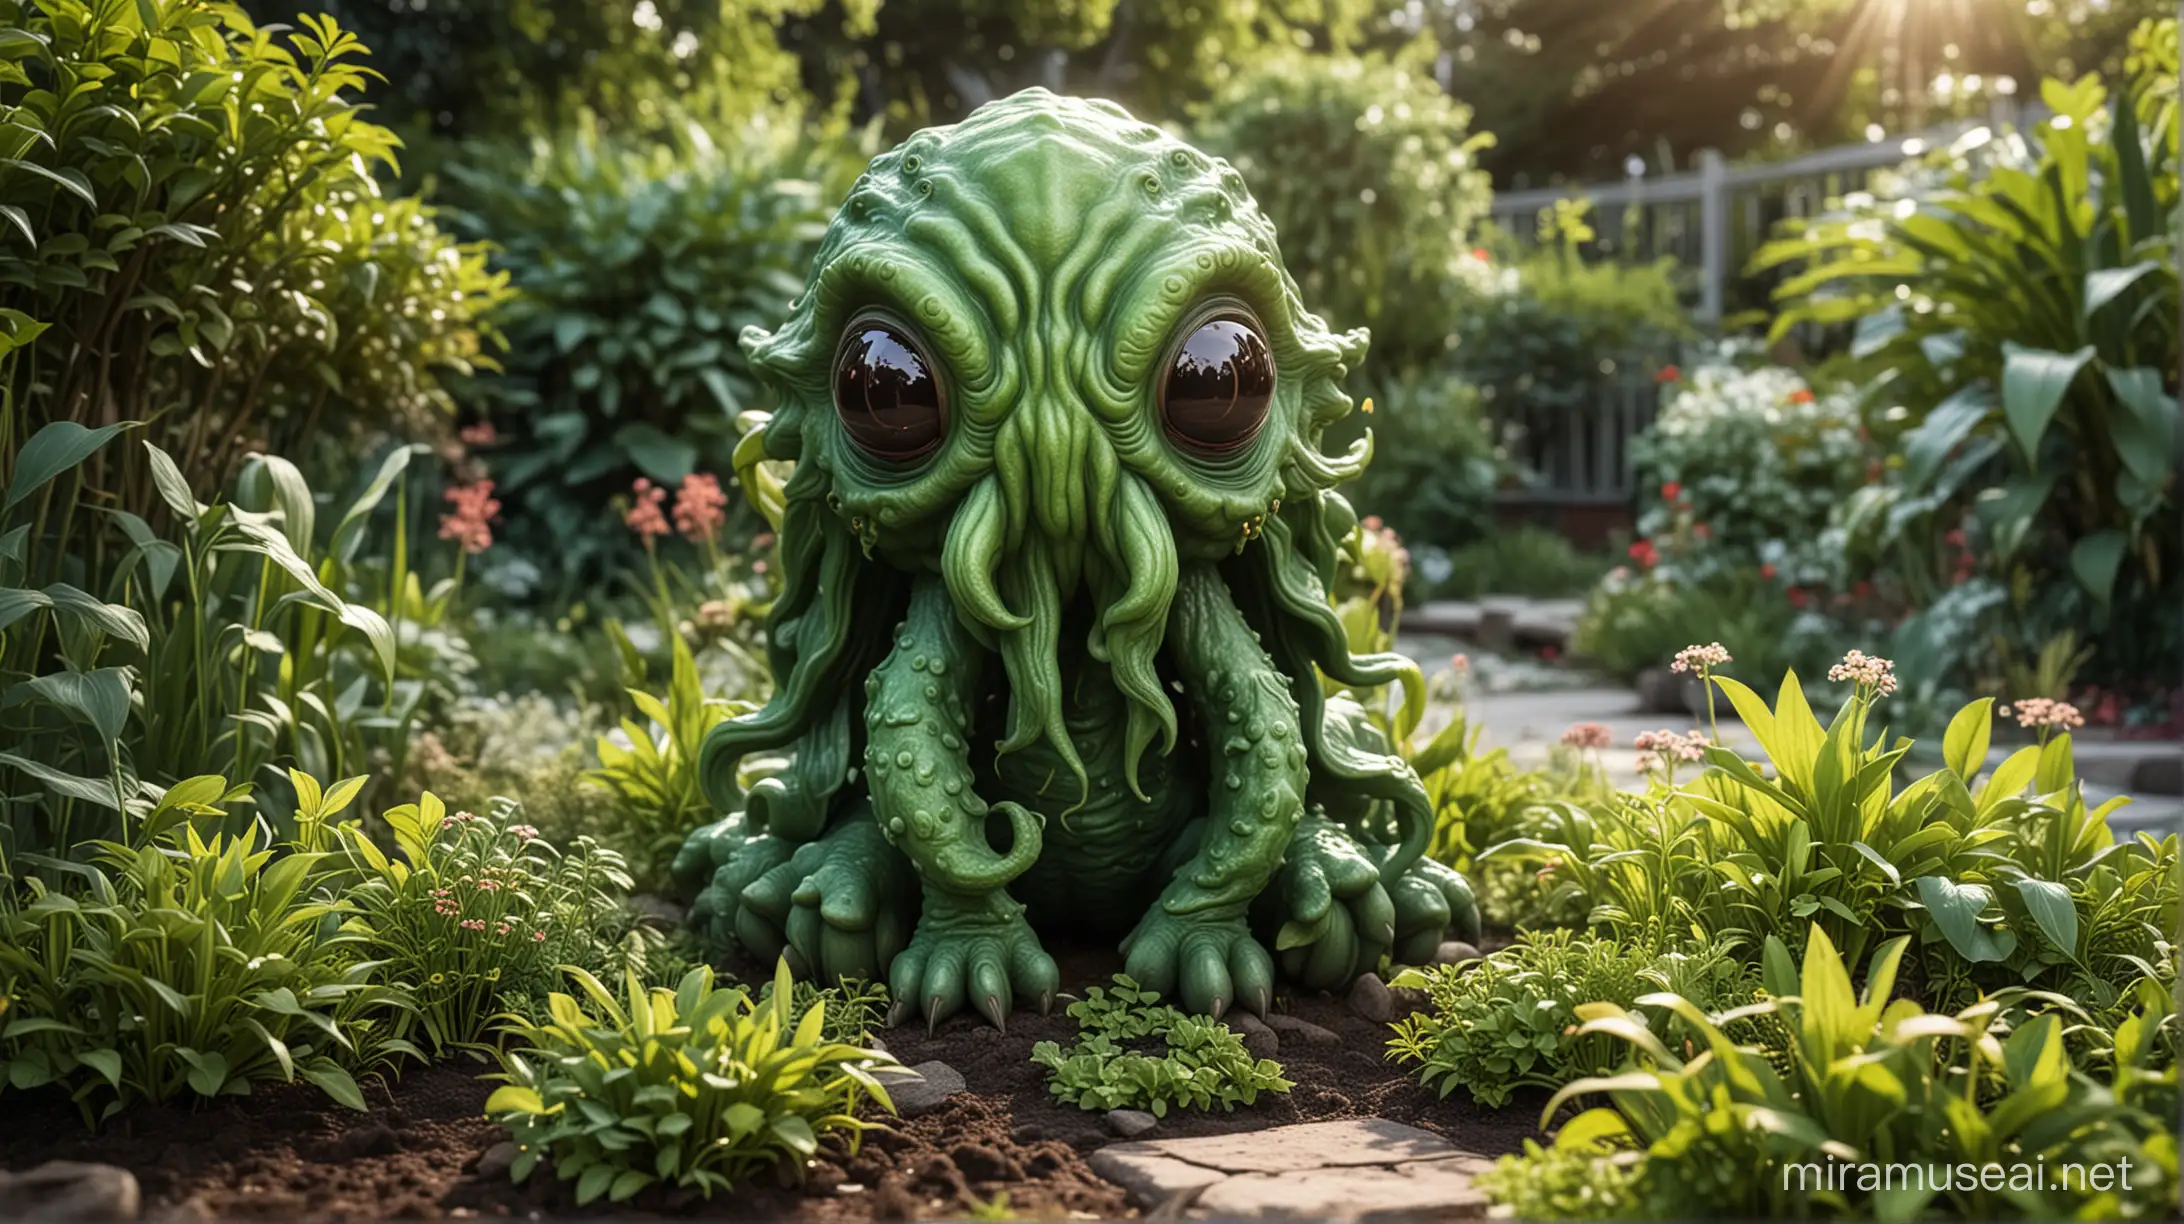 A cute little cthulhu monster in a brightly lit garden.